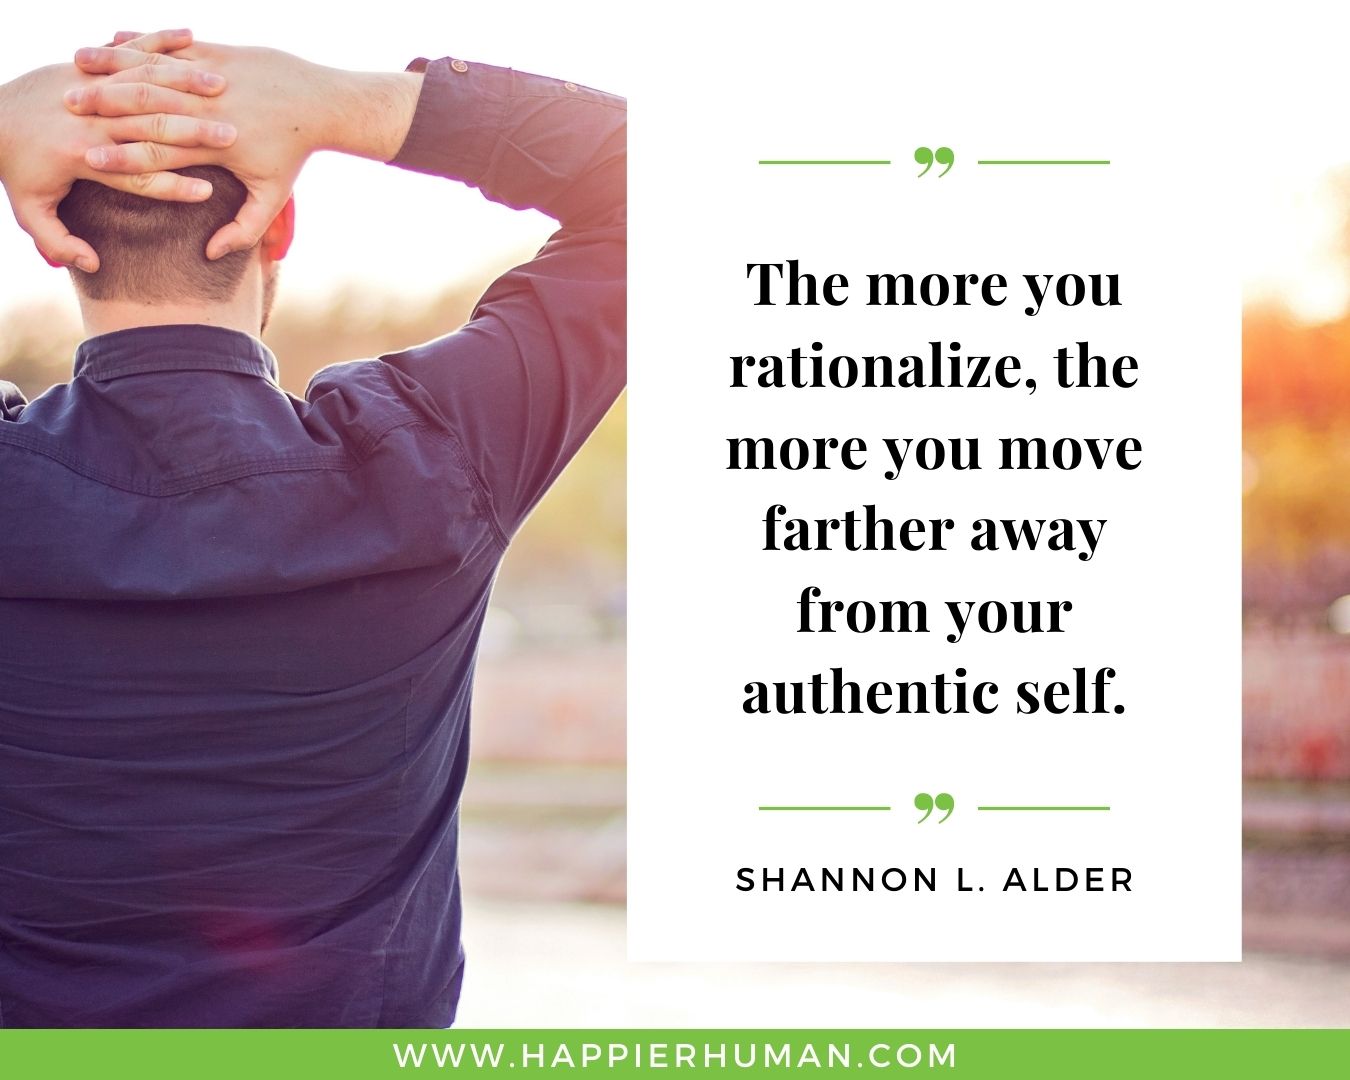 Overthinking Quotes - “The more you rationalize, the more you move farther away from your authentic self.” - Shannon L. Alder